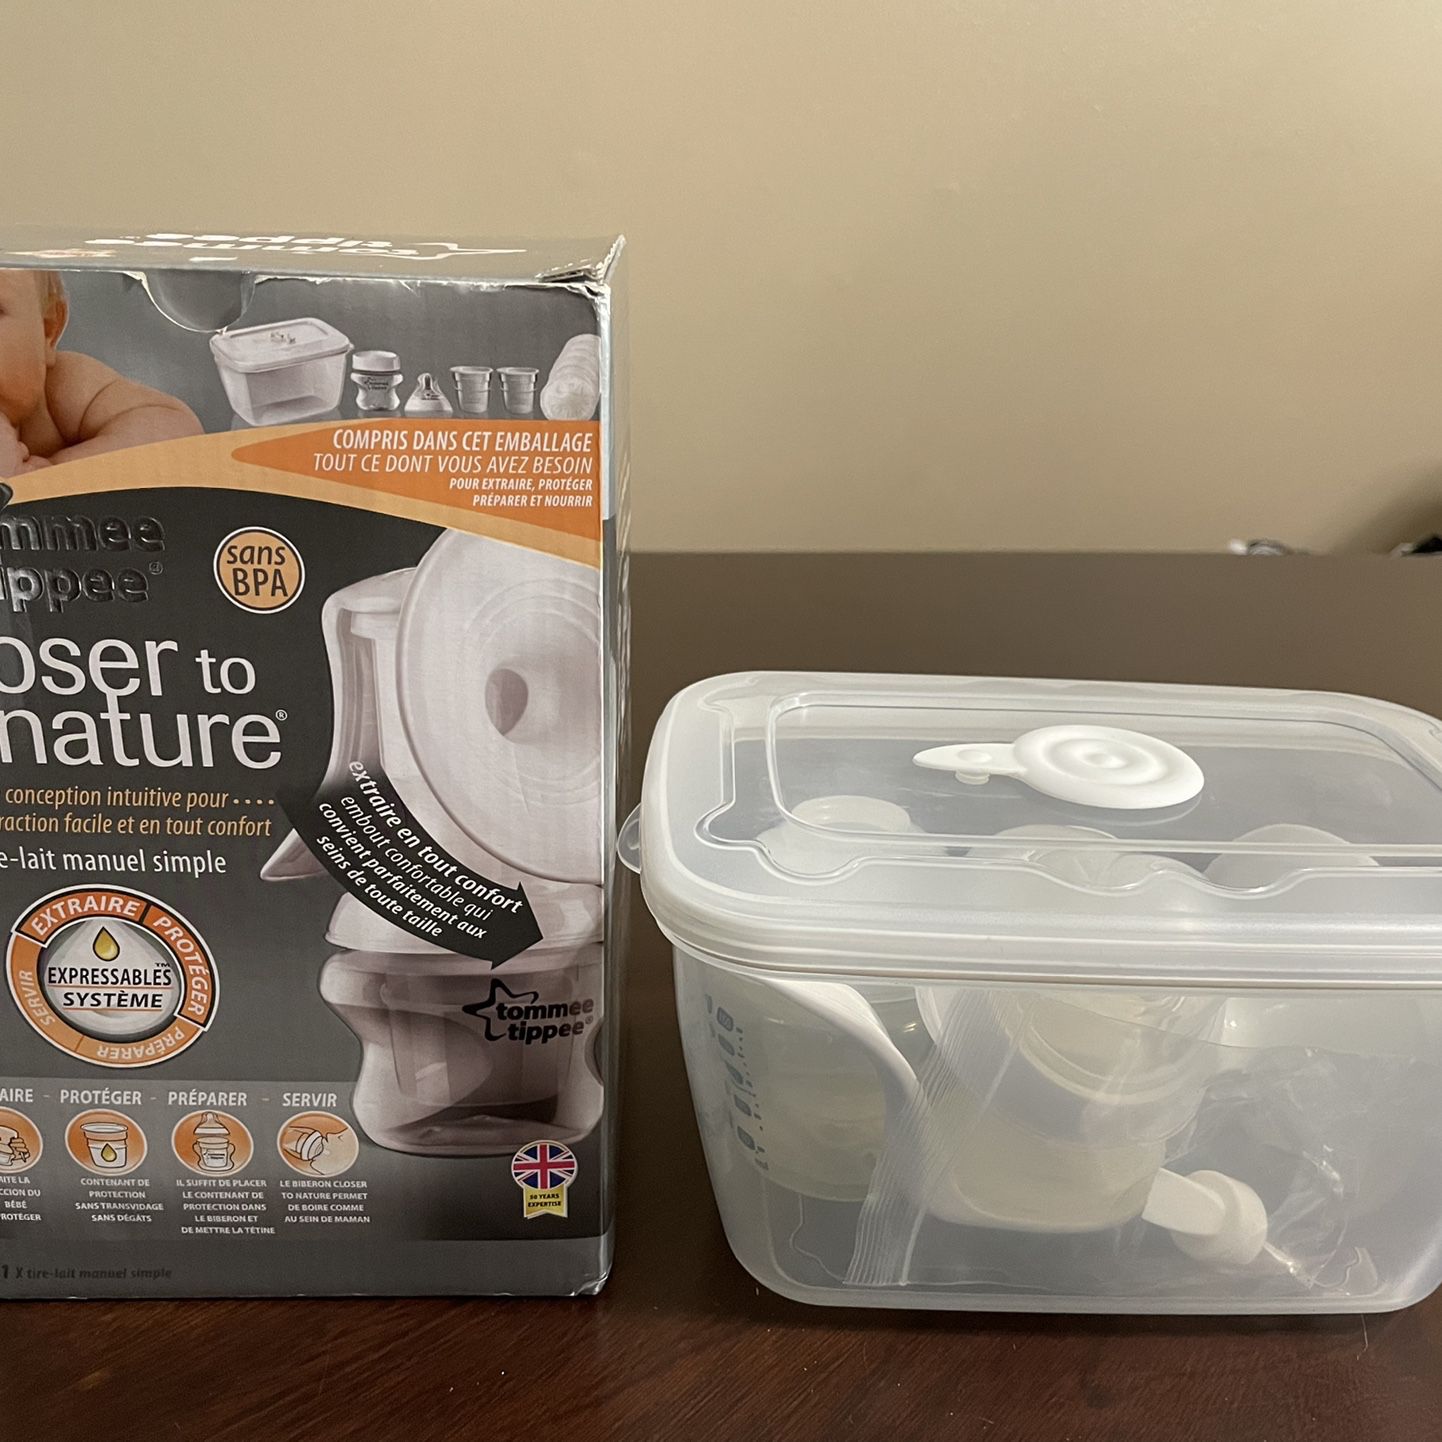 Tommee Tippee Closer to Nature Single Manual Breast Pump for Sale in San TX OfferUp